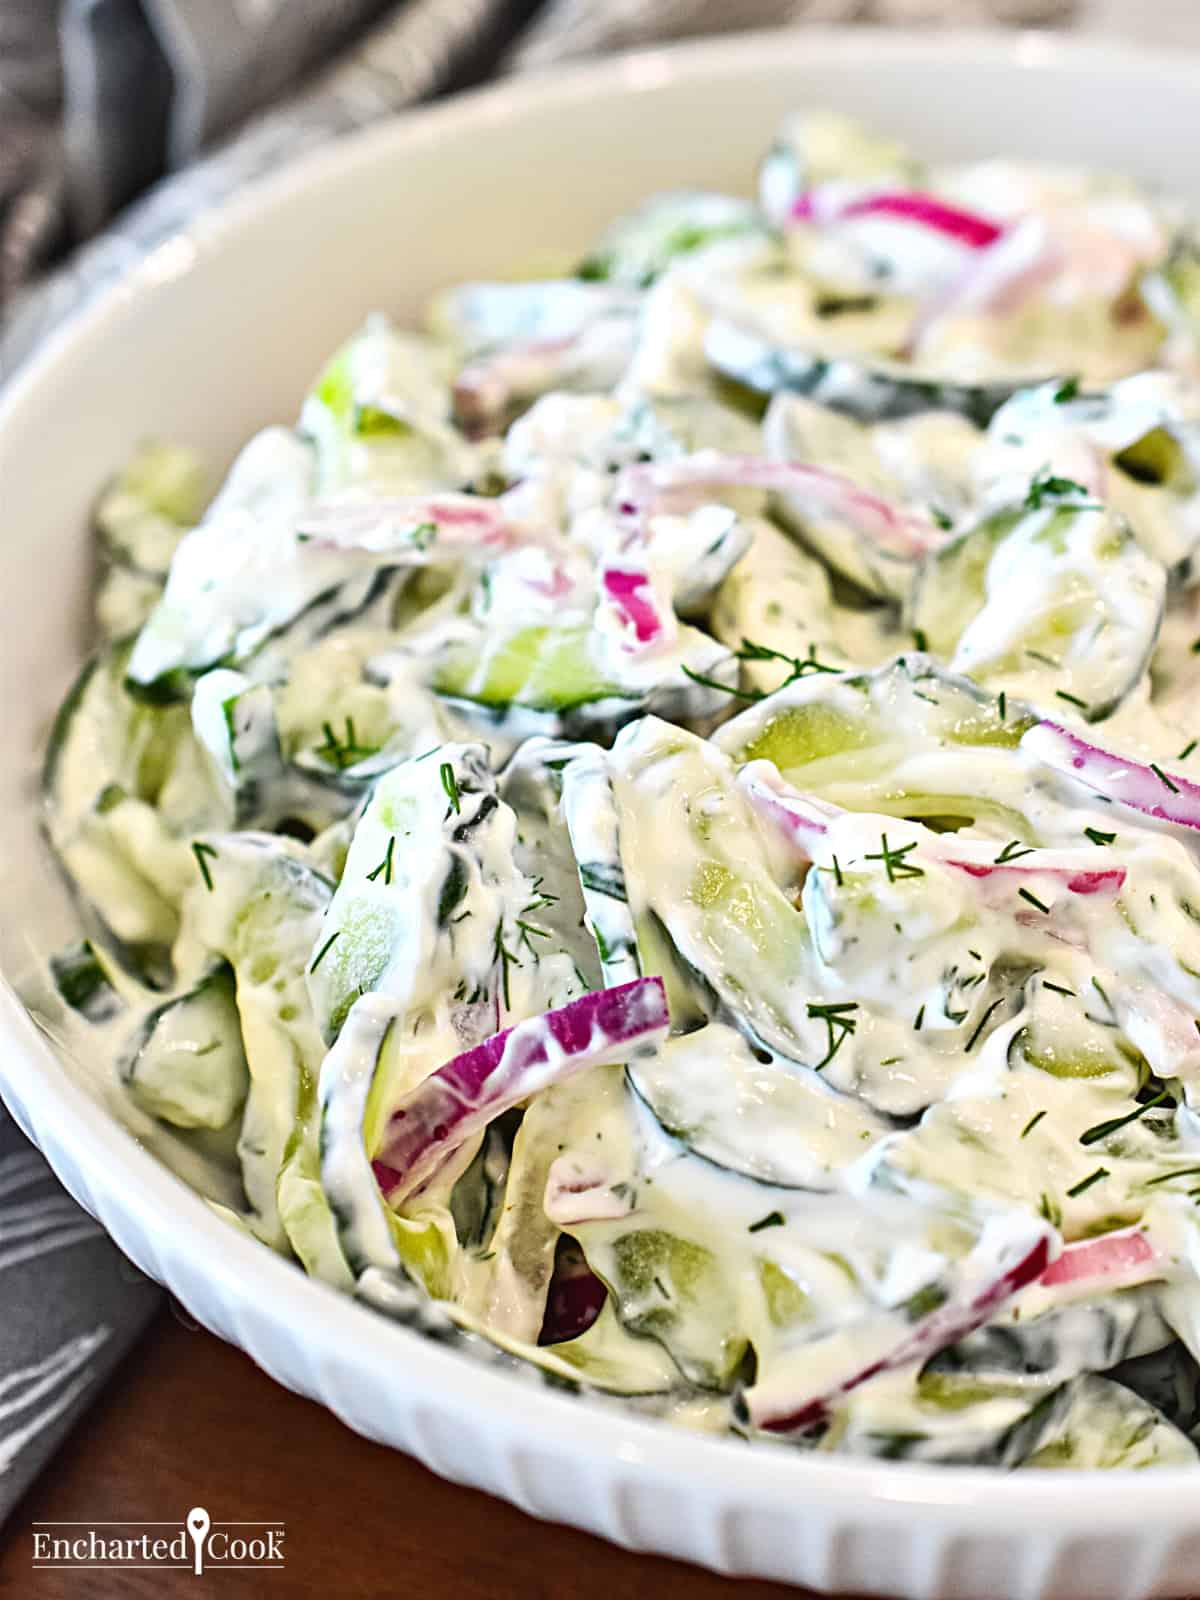 Sliced cucumber and red onion in a creamy dressing in a white bowl.